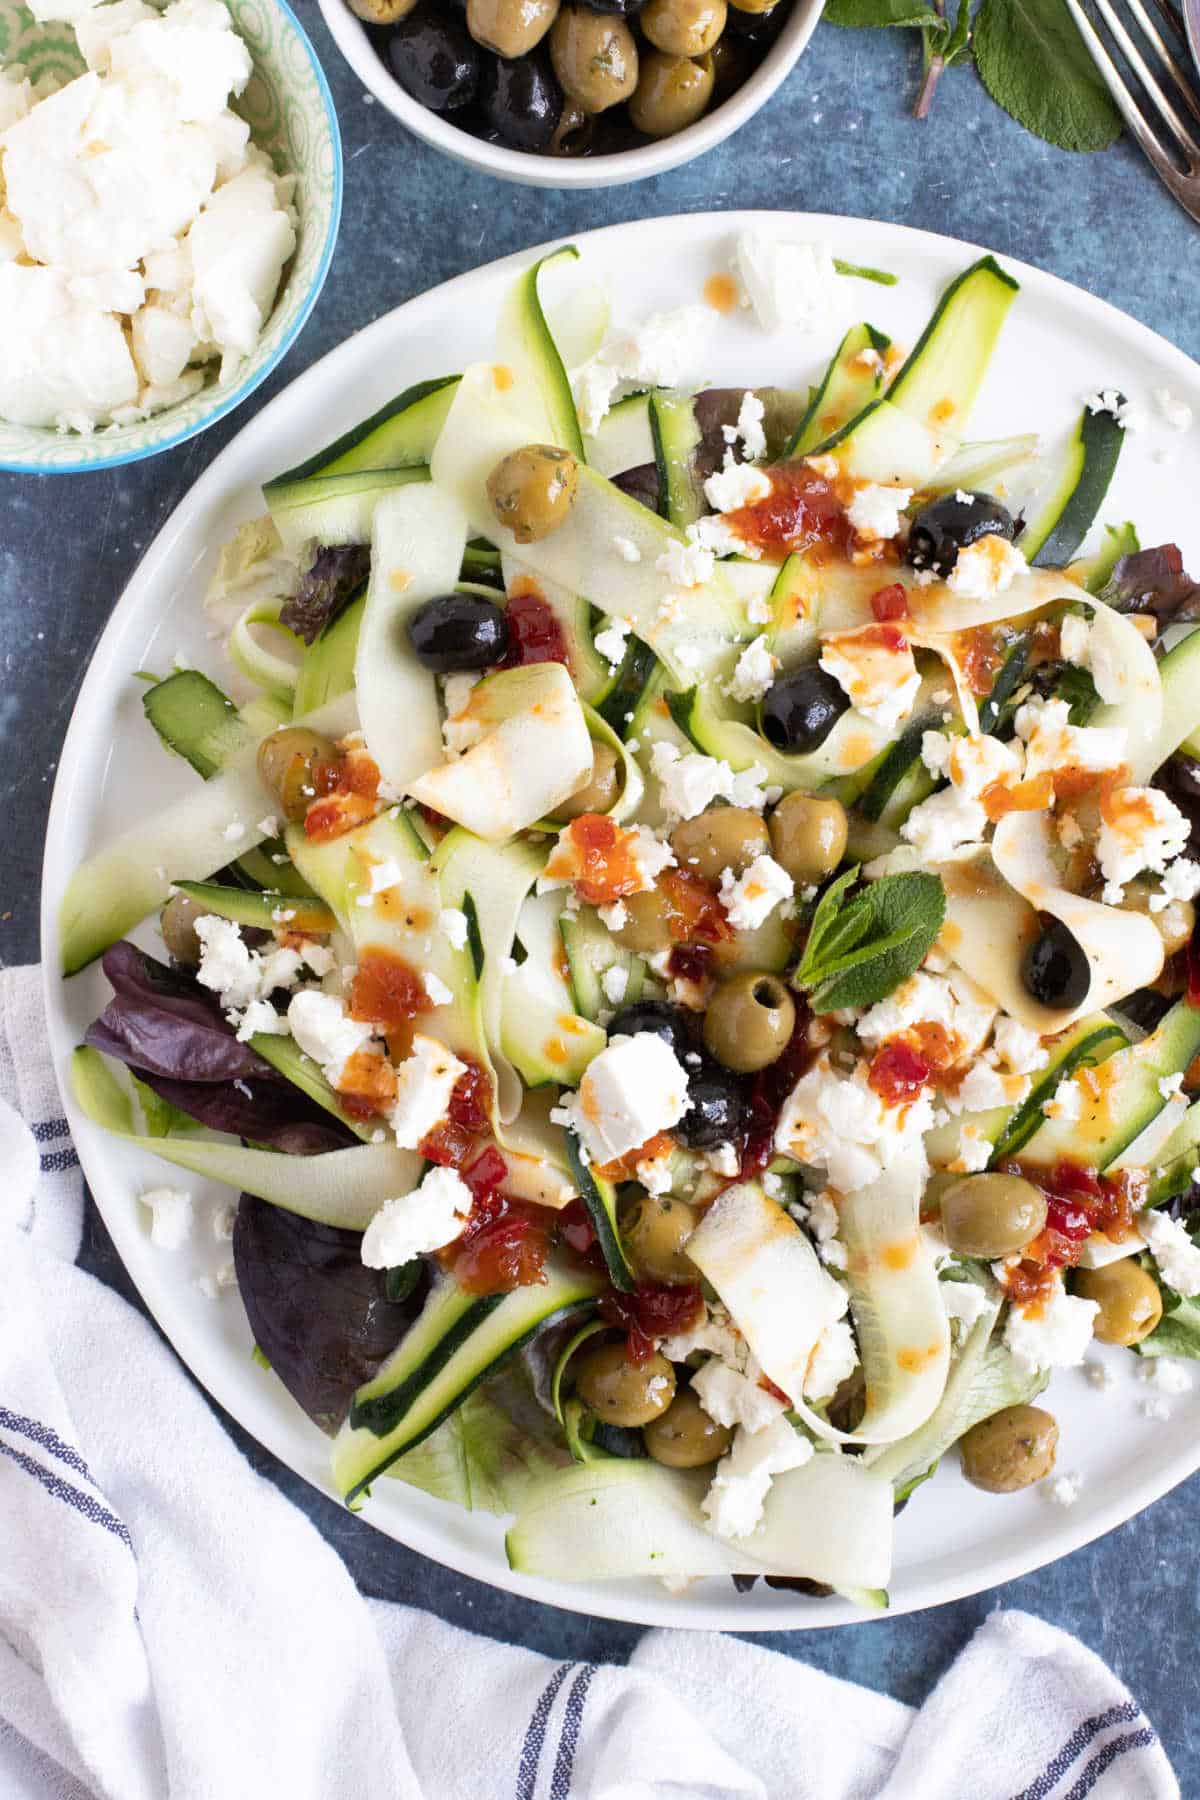 Courgette, feta and olive salad in a white serving plate.